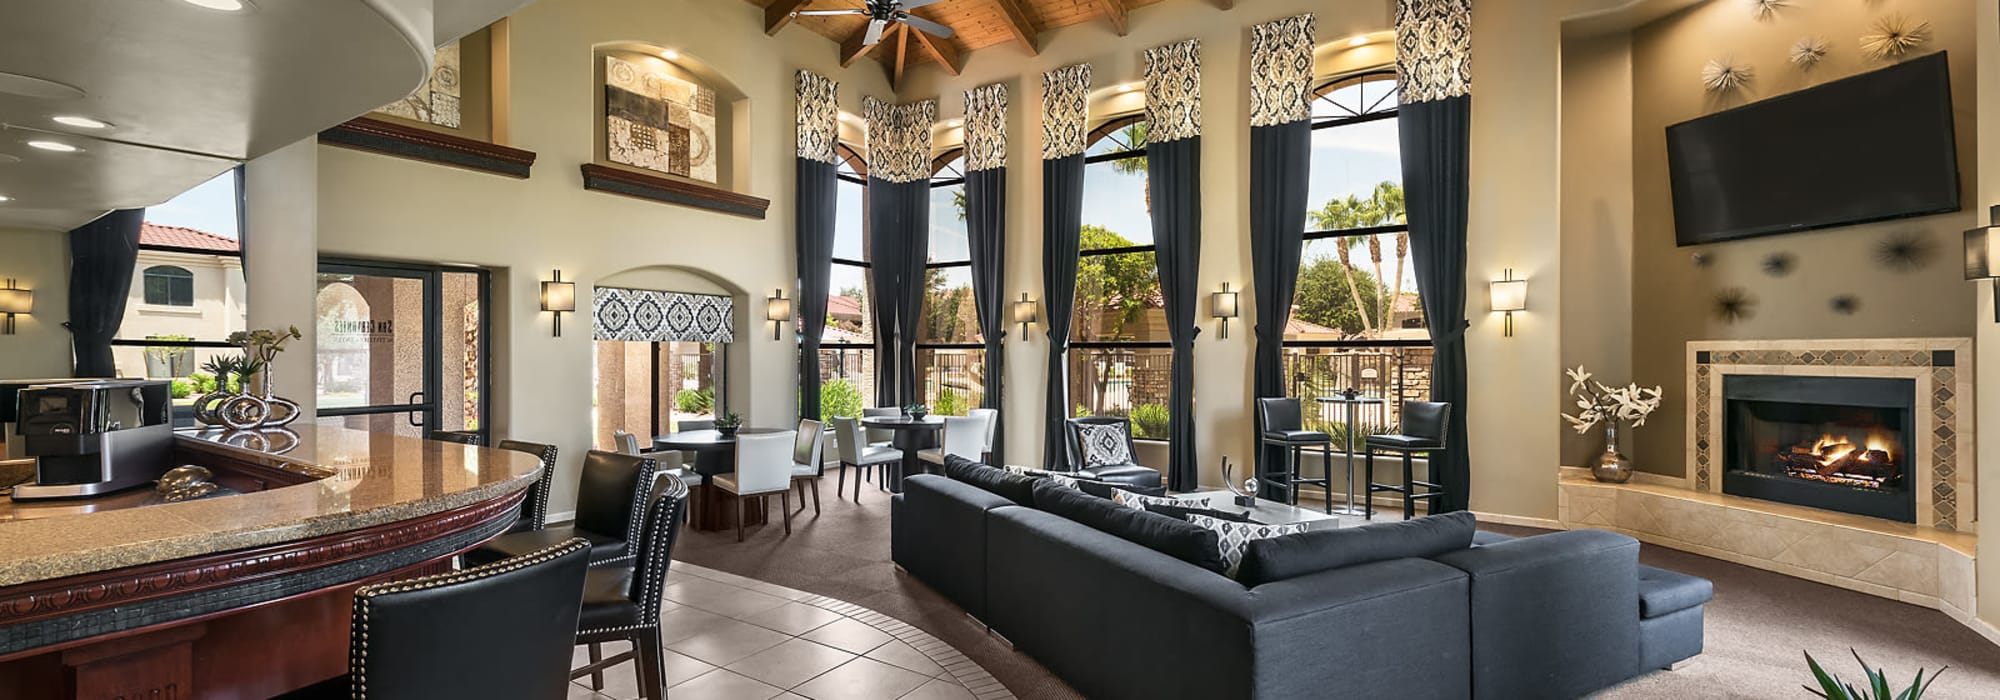 Spacious clubhouse to entertain friends and family at San Cervantes in Chandler, Arizona